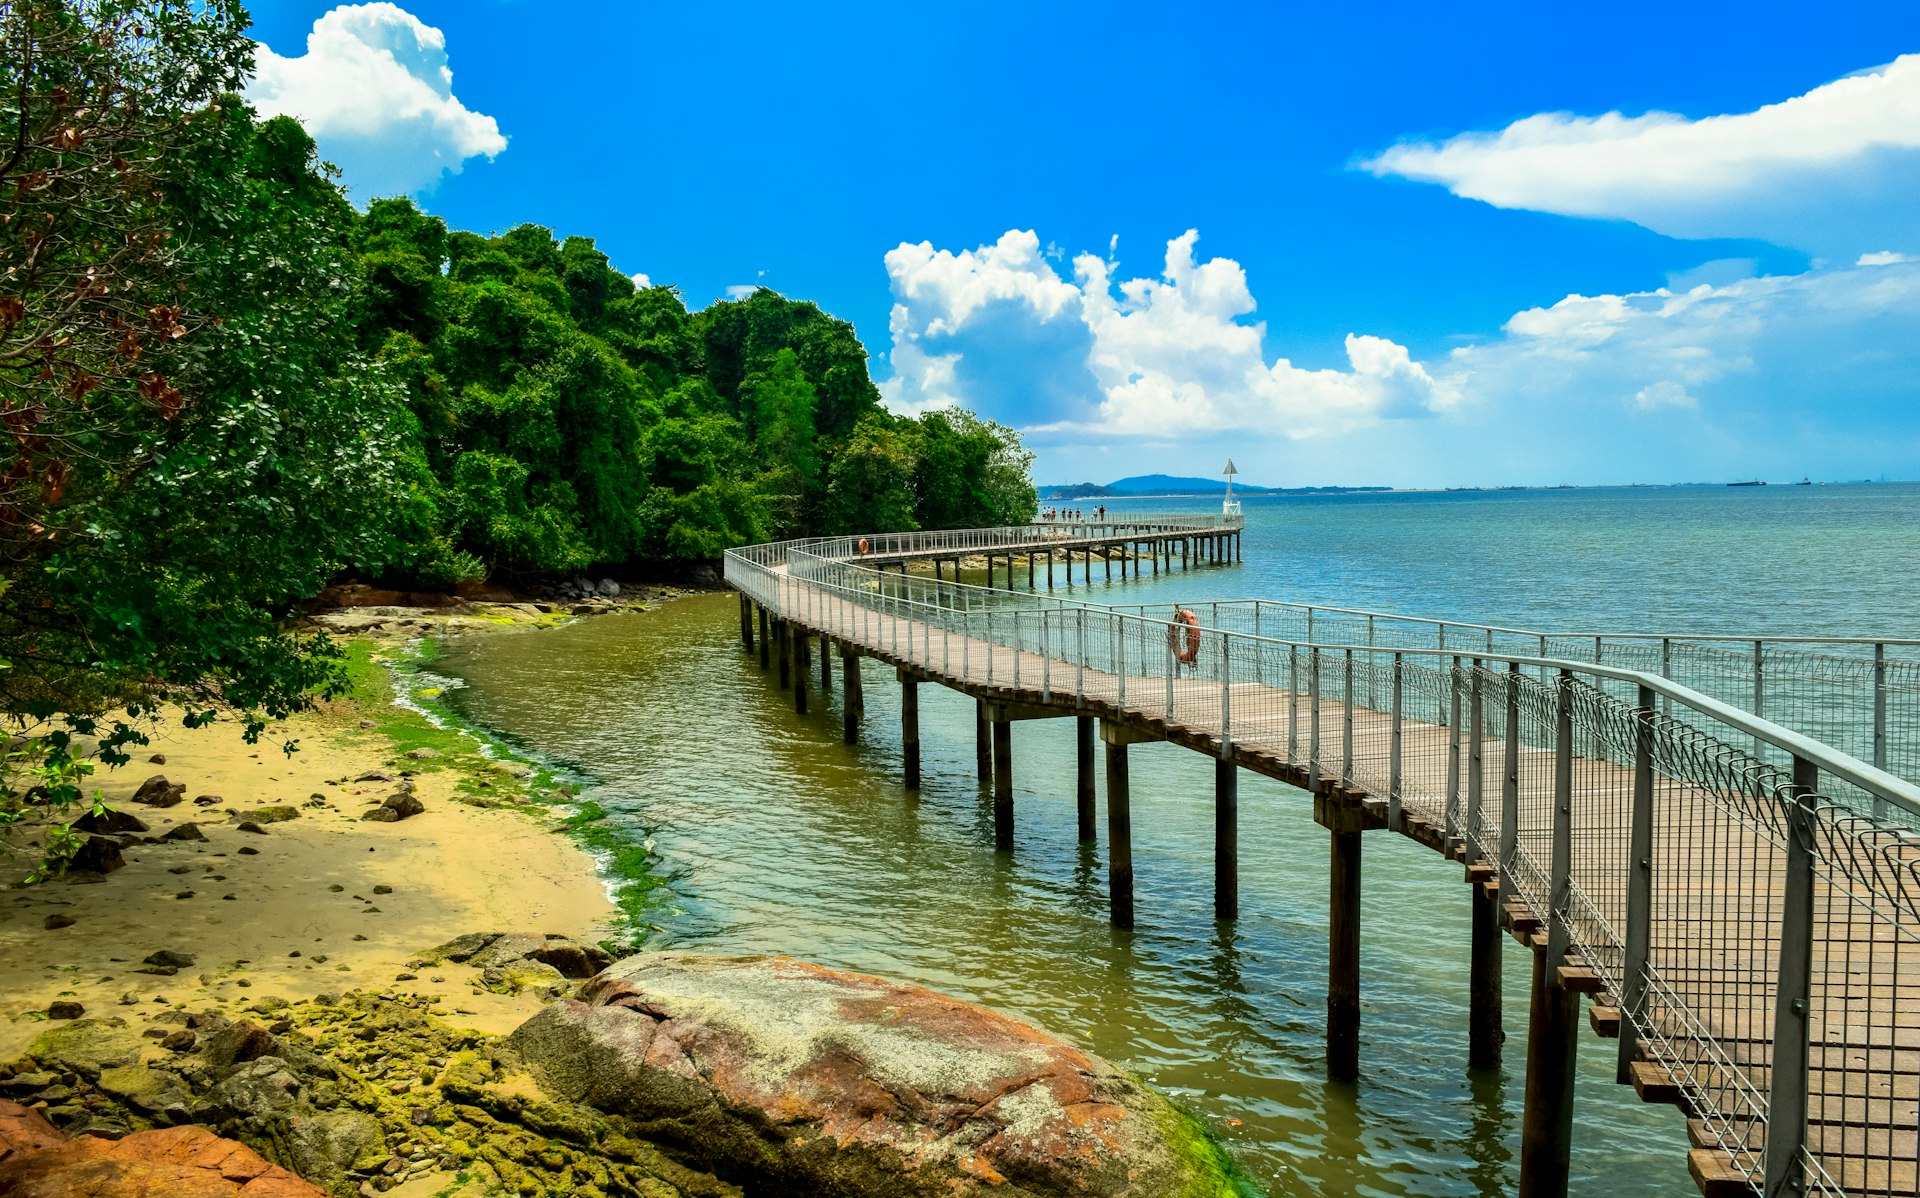 A section of boardwalk along the Pulau Ubin island Singapore -- a picturesque place for cycling 